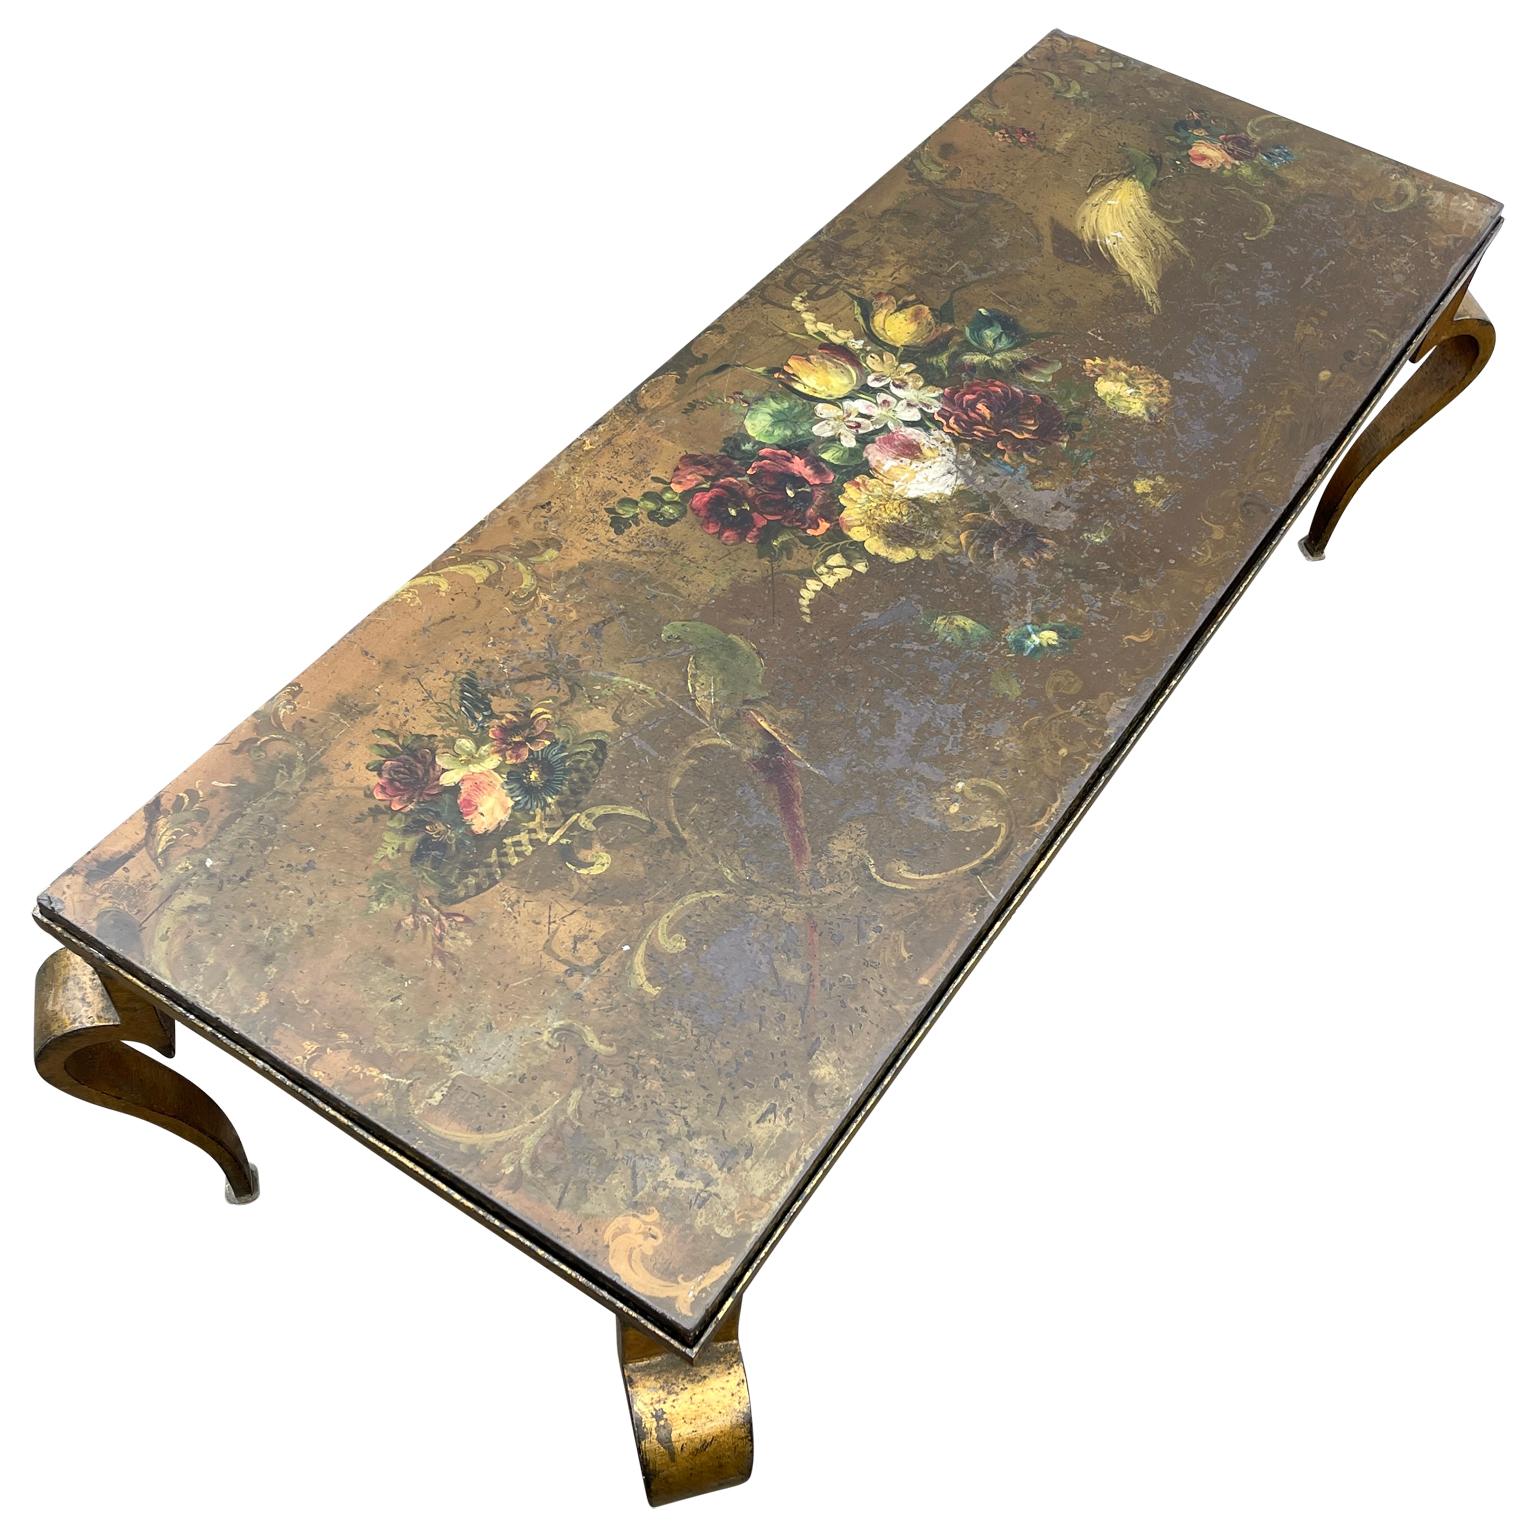 Vintage Italian Hand-painted Rectangular Cocktail Table, Circa 1950 In Good Condition For Sale In Haddonfield, NJ